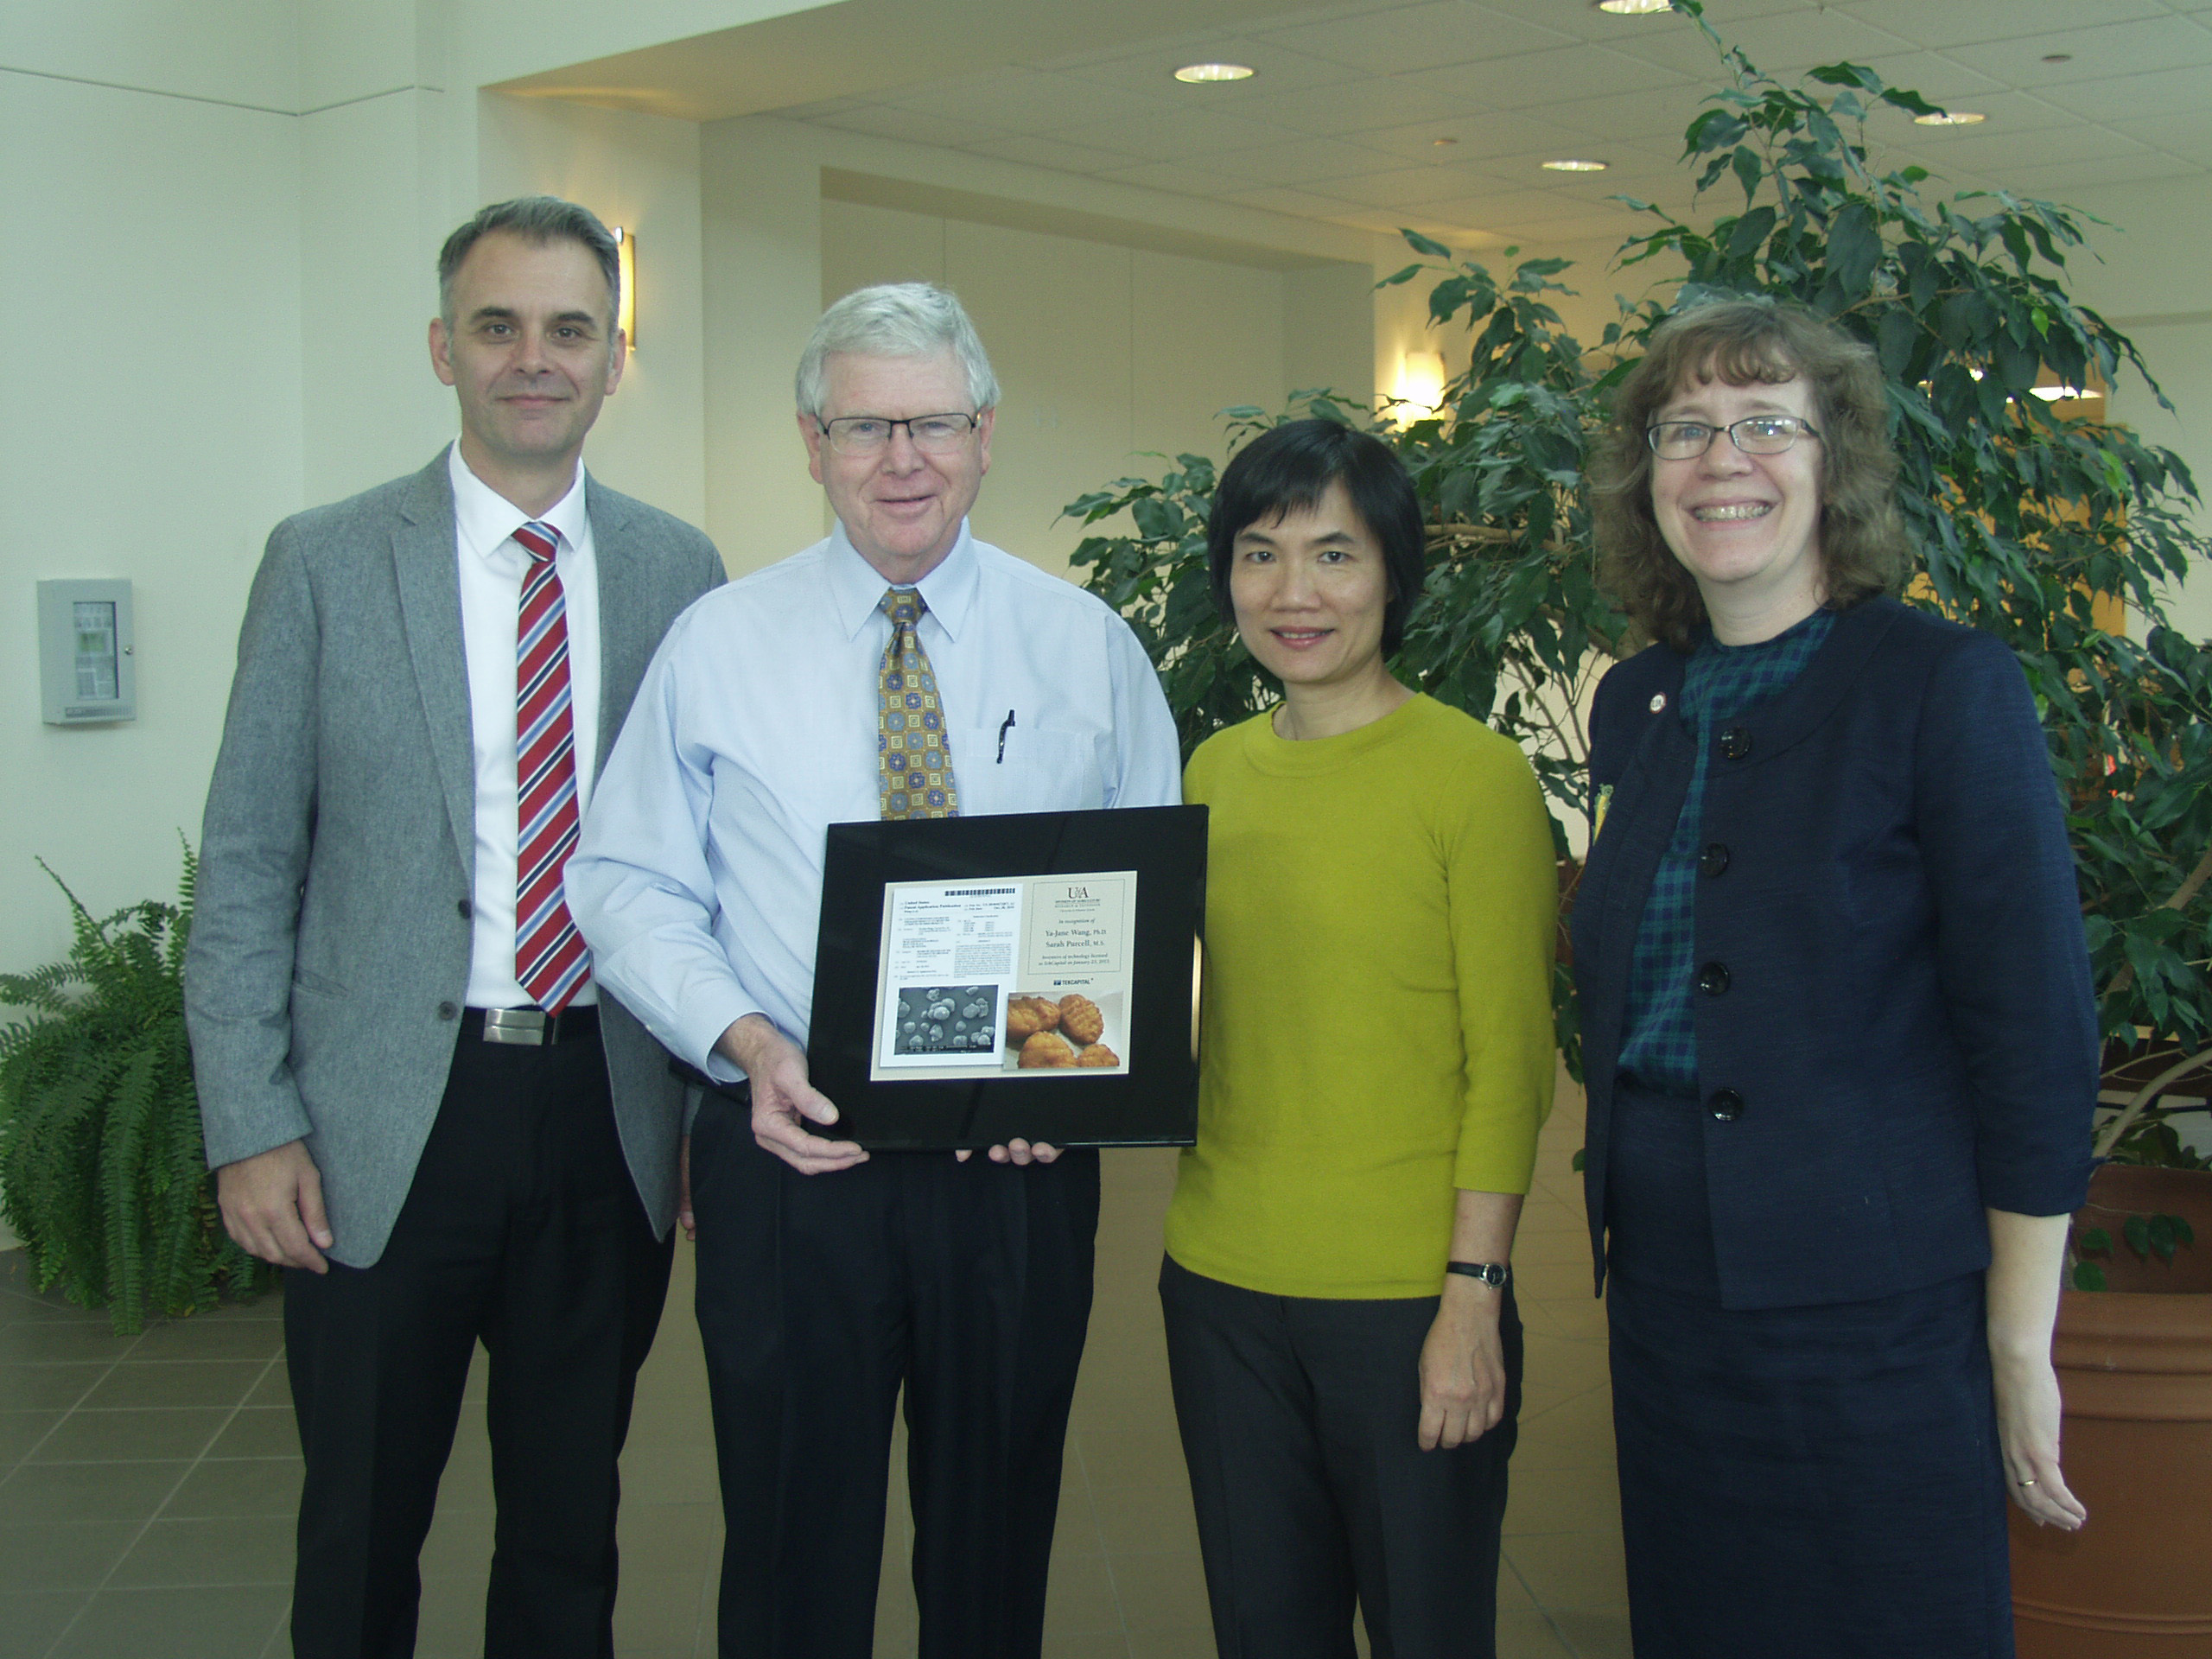 Professor Ya-Jane Wang (third from left) is recognized for her research with (from left) Jean-Francois Meullenet, head, Food Science; Mark Cochran, vice president for agriculture, and Lisa Childs, assistant vice president for technology commercialization.